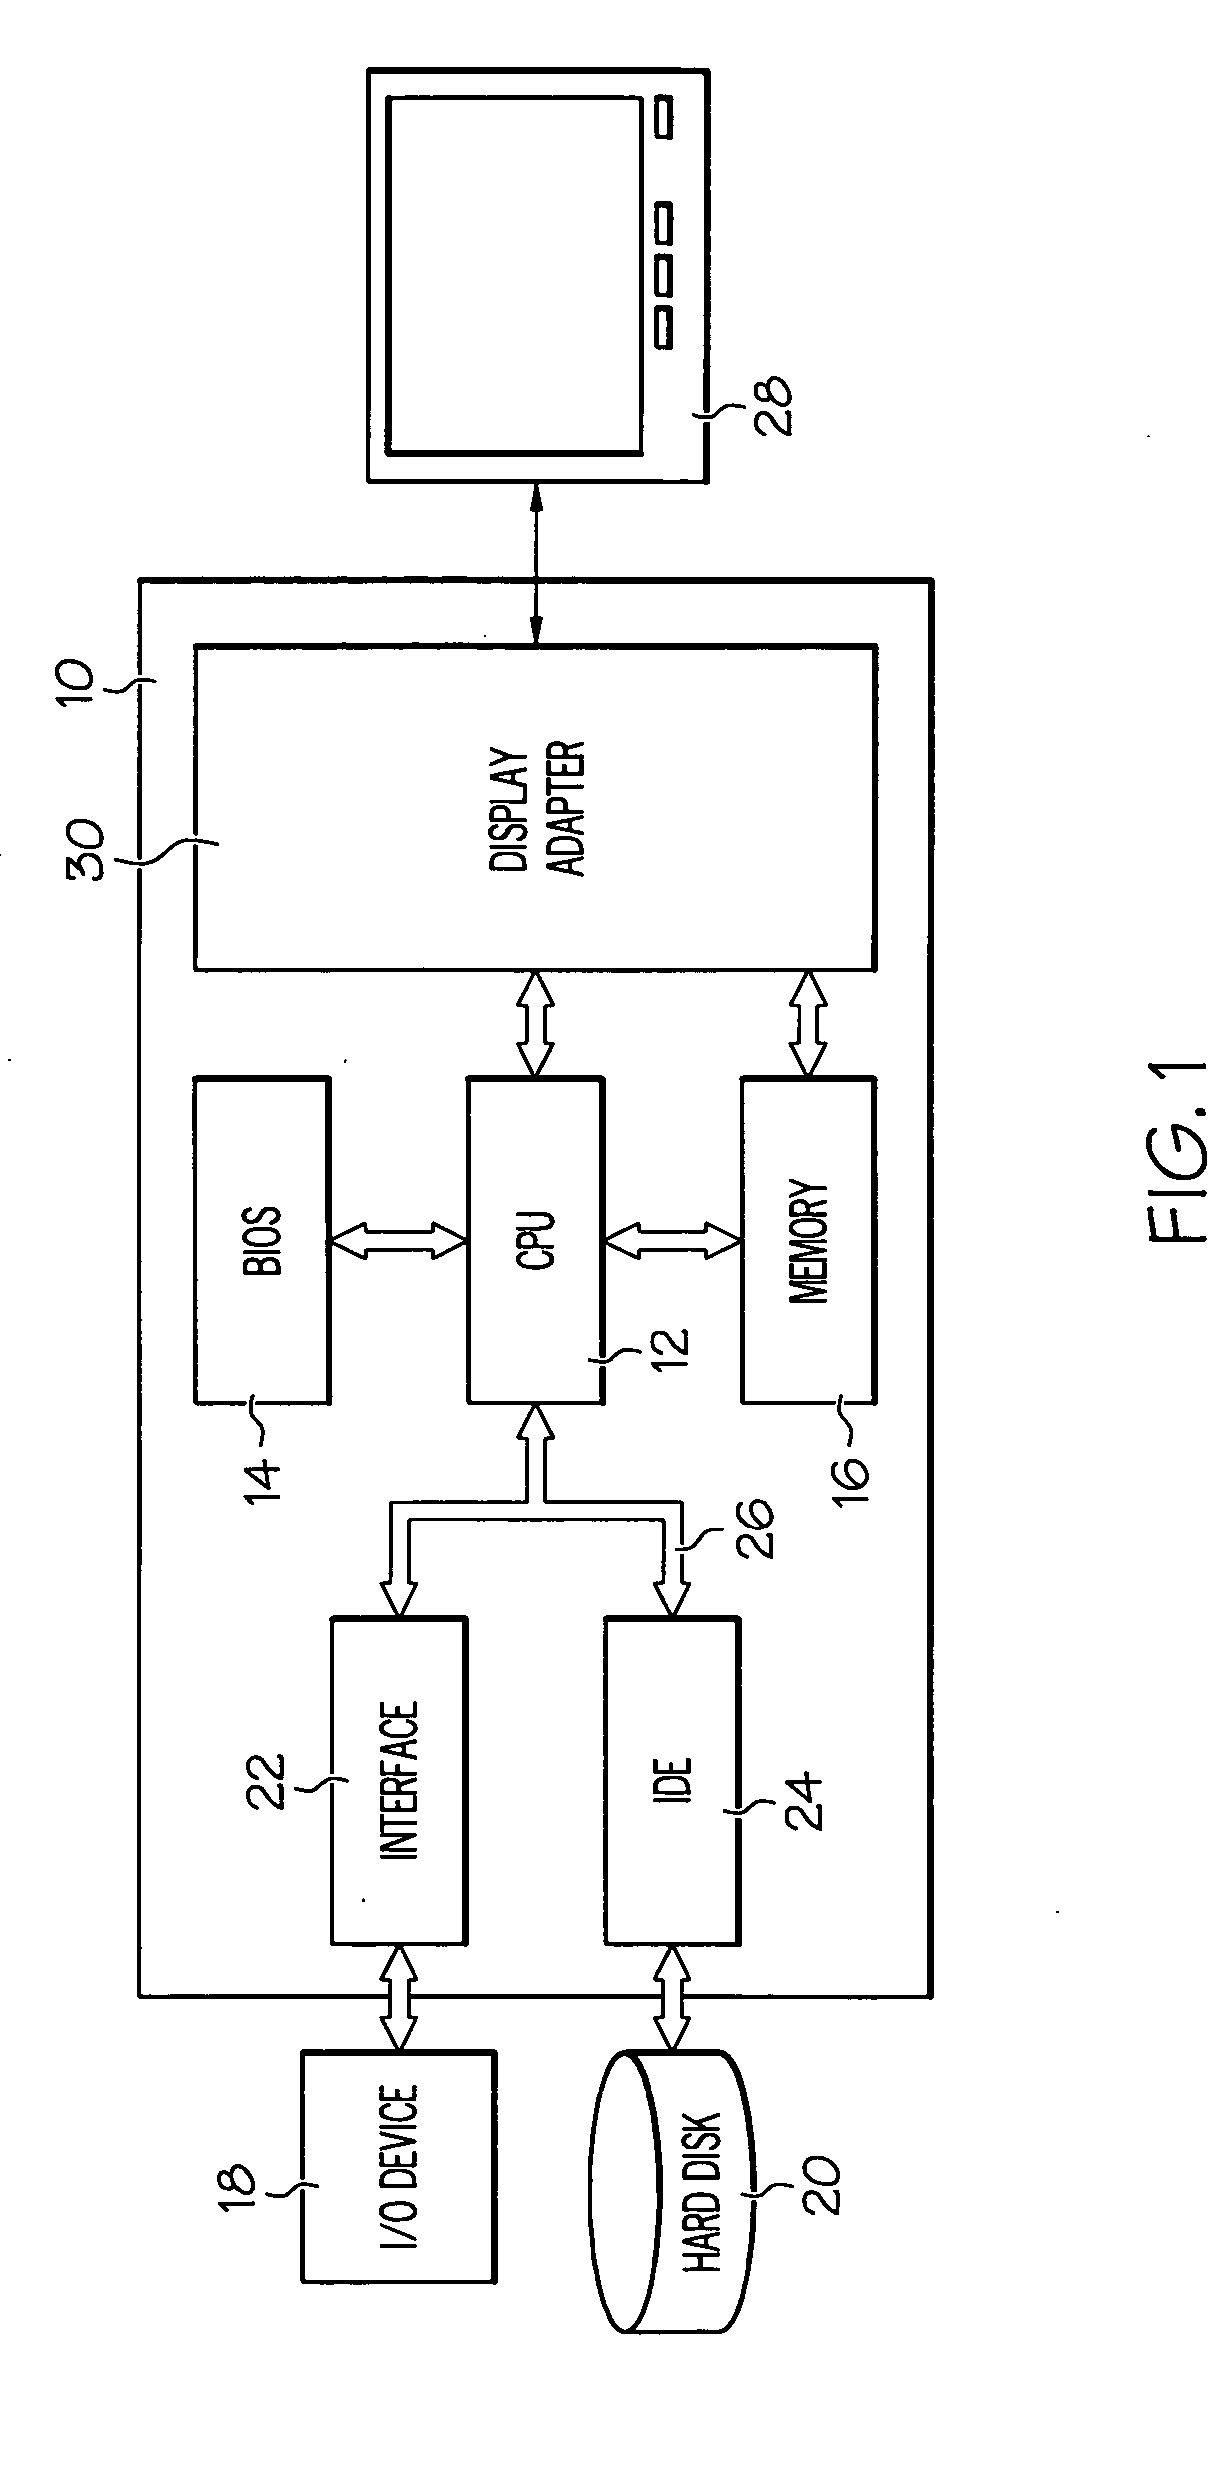 Information processing apparatus, method of controlling display of liquid crystal display, program product for executing method of controlling display, and information processing apparatus with improved adjustment effects on viewing angle range